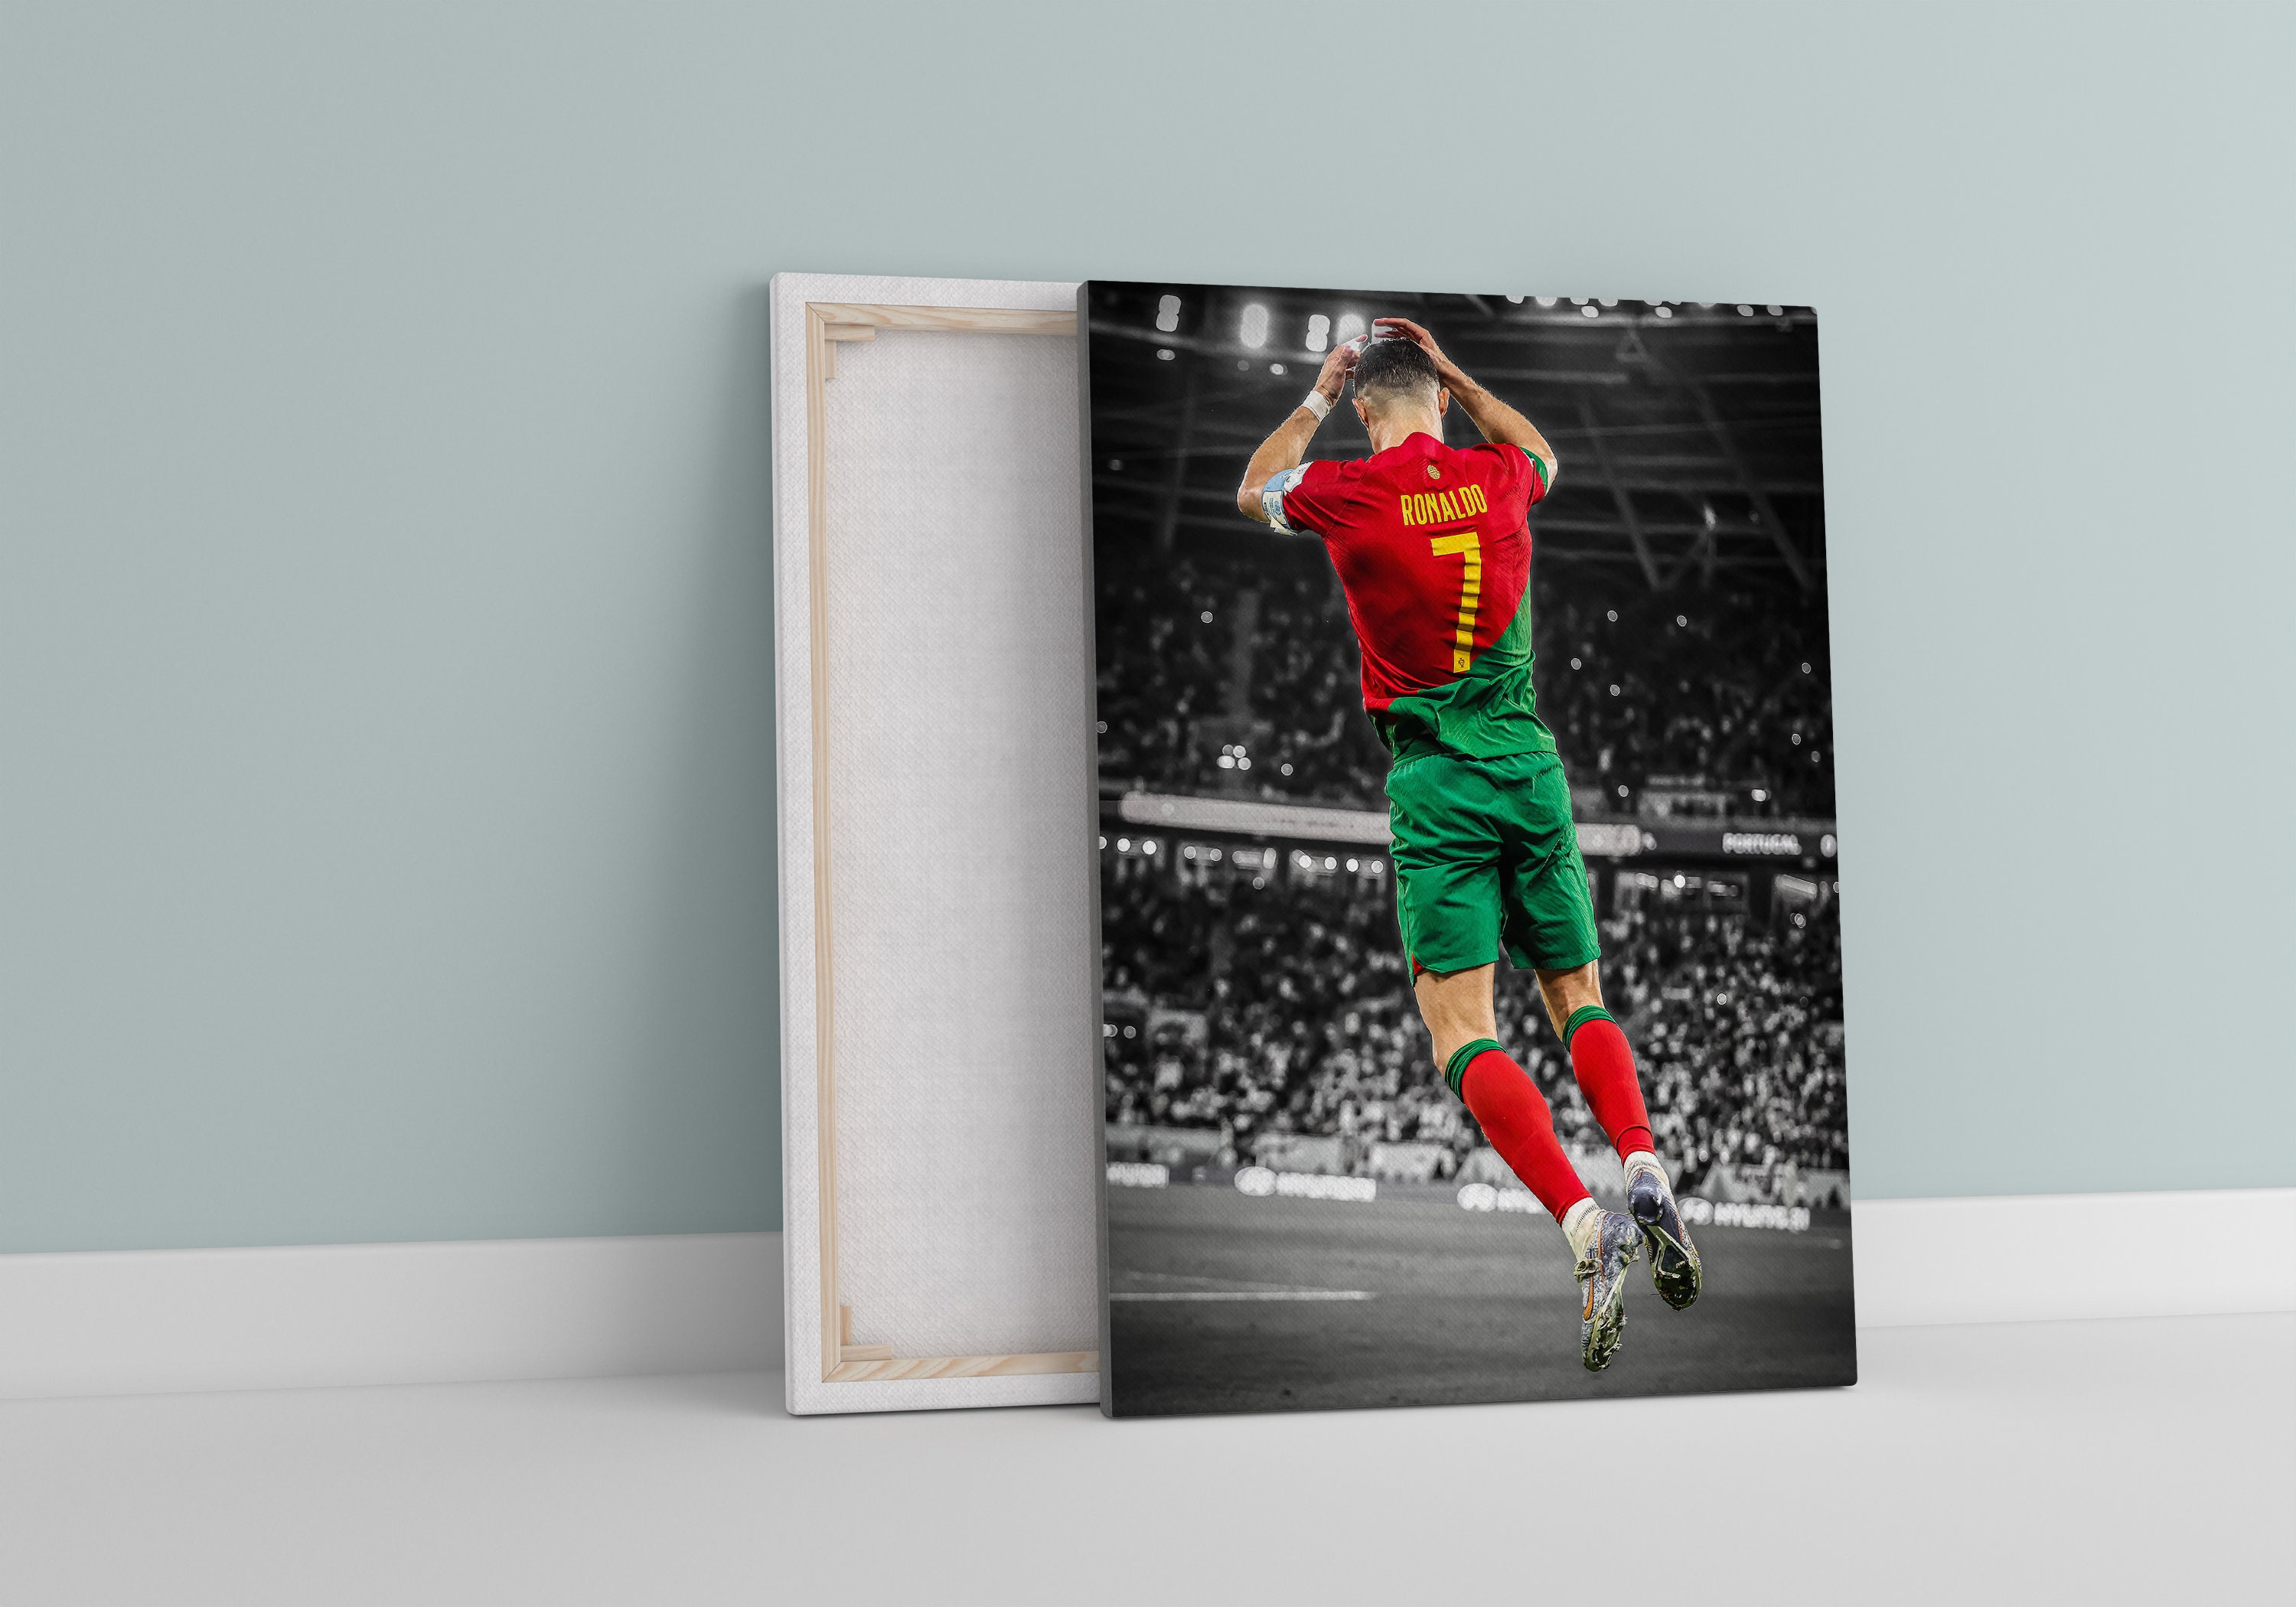 Cristiano Ronaldo CR7 Portugal/football World Cup Poster Wall Art  Waterproof Canvas Poster Wall Decor Hanging Metal Poster Signs for Home boy  gift